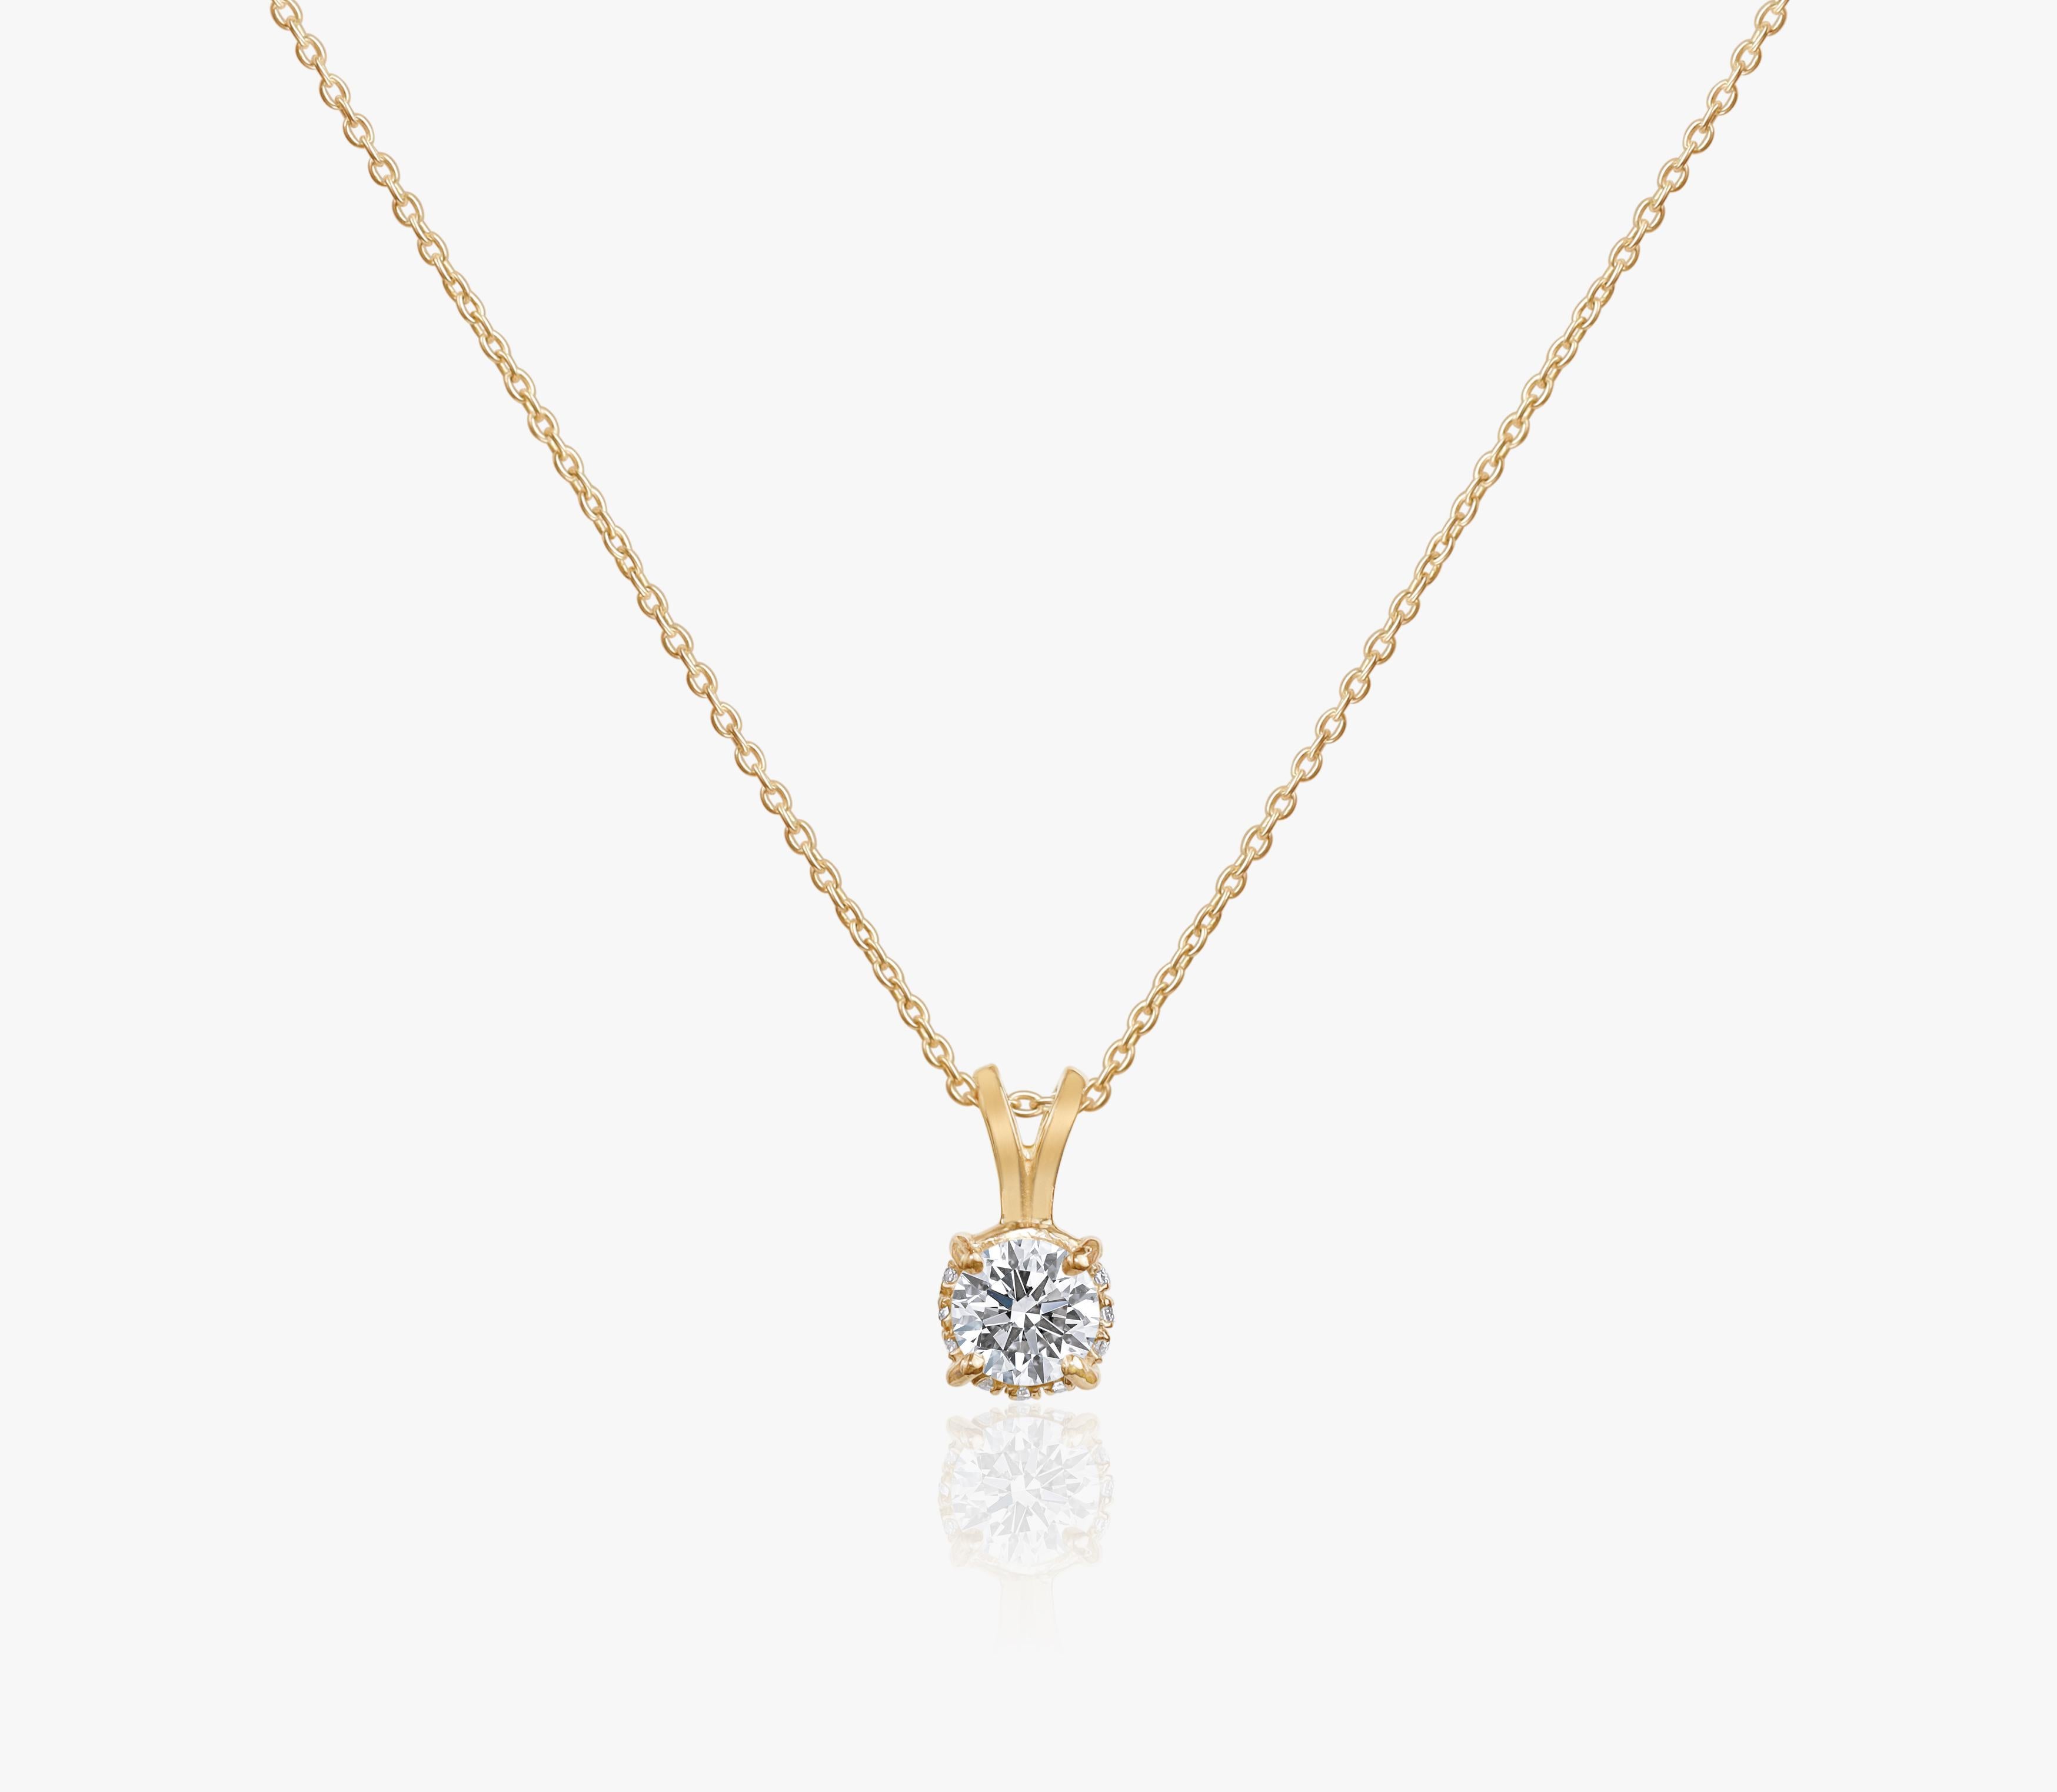 GIA Report Certified 2 Carat D Colorless IF Round Cut Diamond Pendant Necklace

Available in 18k Yellow gold.

Same design can be made also with other custom gemstones per request.

Product details:

- Solid gold

- Main stone - approx. 2 carat GIA